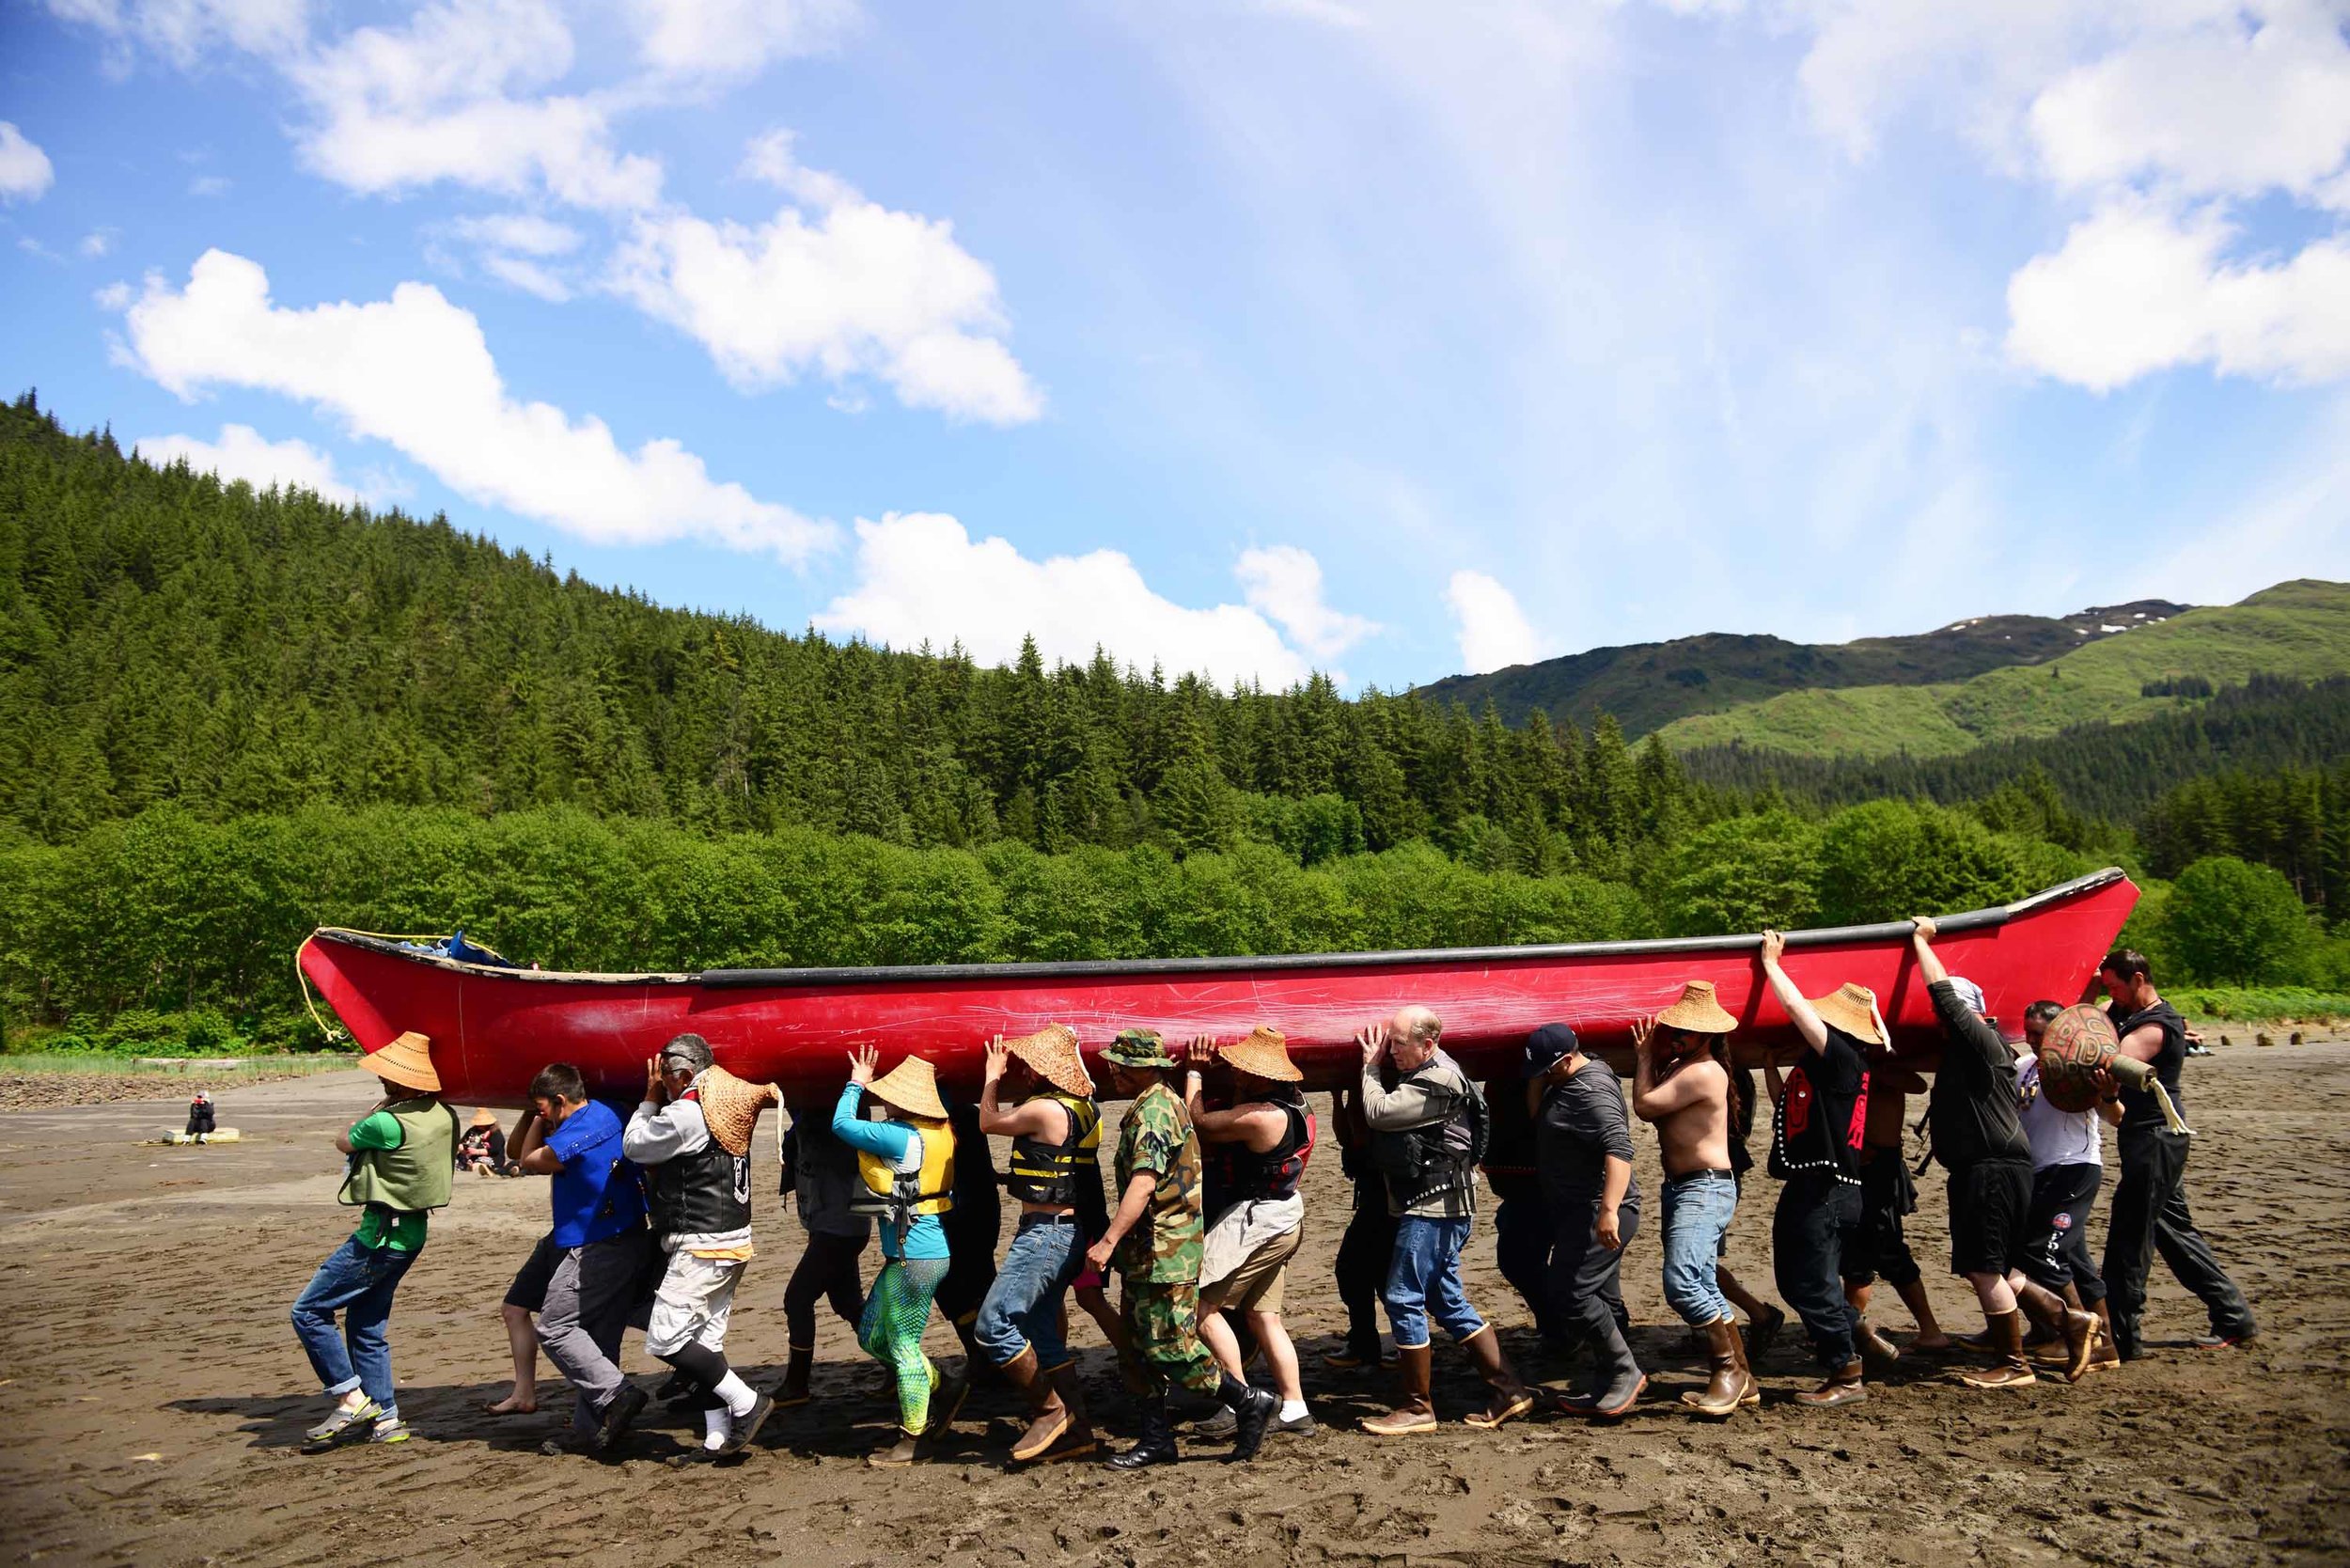  Southeast Alaska’s biennial Celebration of its Alaska Native heritage begins as paddlers arrive in Juneau after long canoe journeys from around the region. Paddlers including Gov. Bill Walker carry a vessel down to the water to join the last leg of 